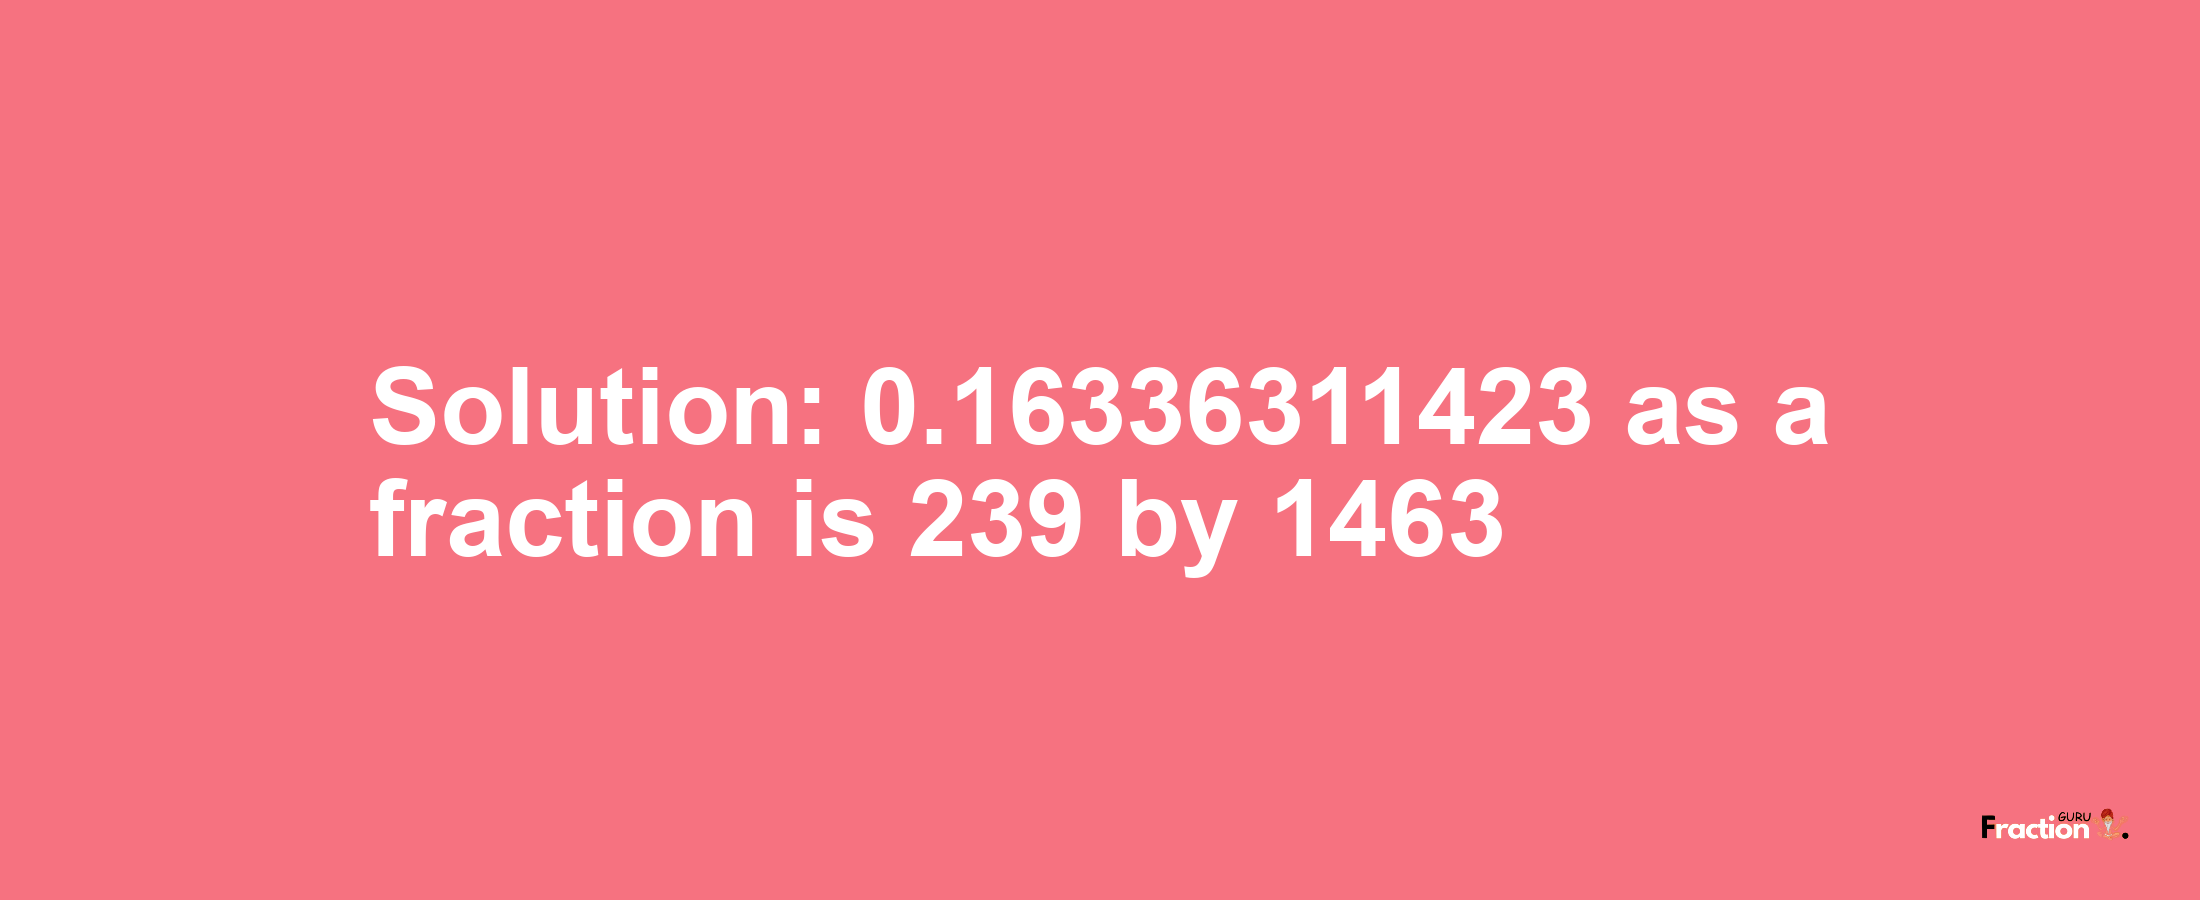 Solution:0.16336311423 as a fraction is 239/1463